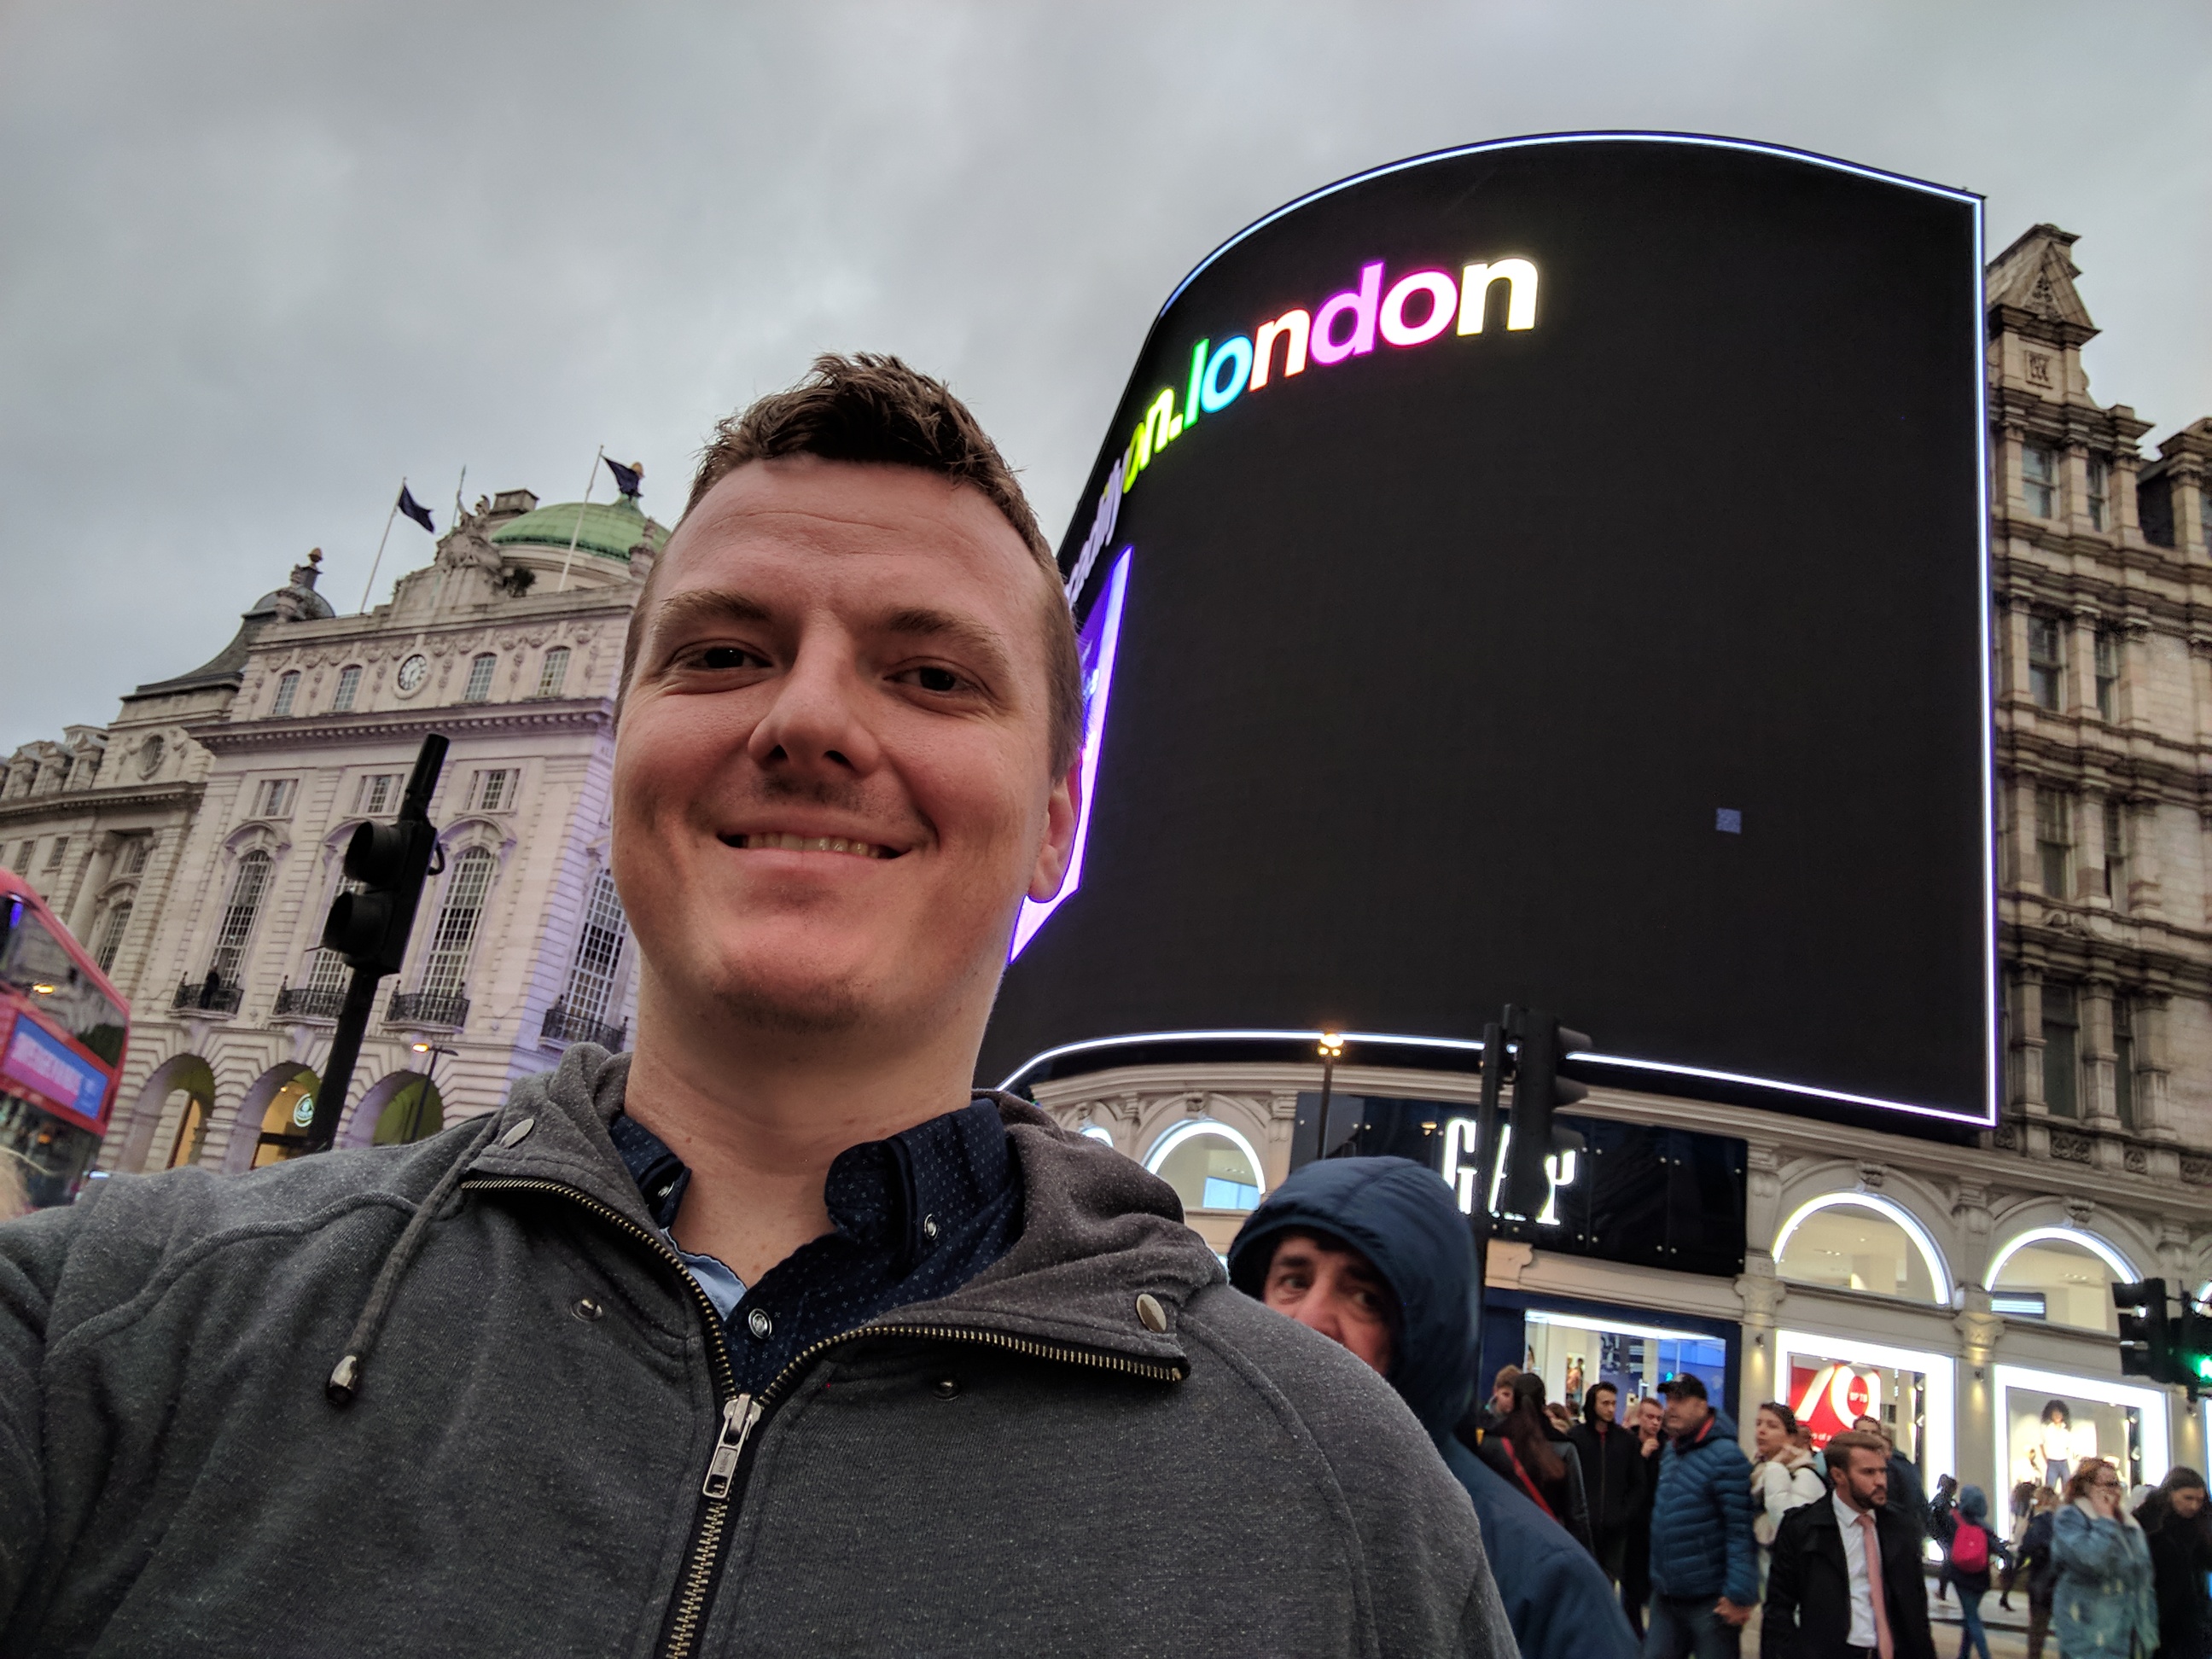 Me smiling in front of the most MASSIVE billboard with "london" written in rainbow text.